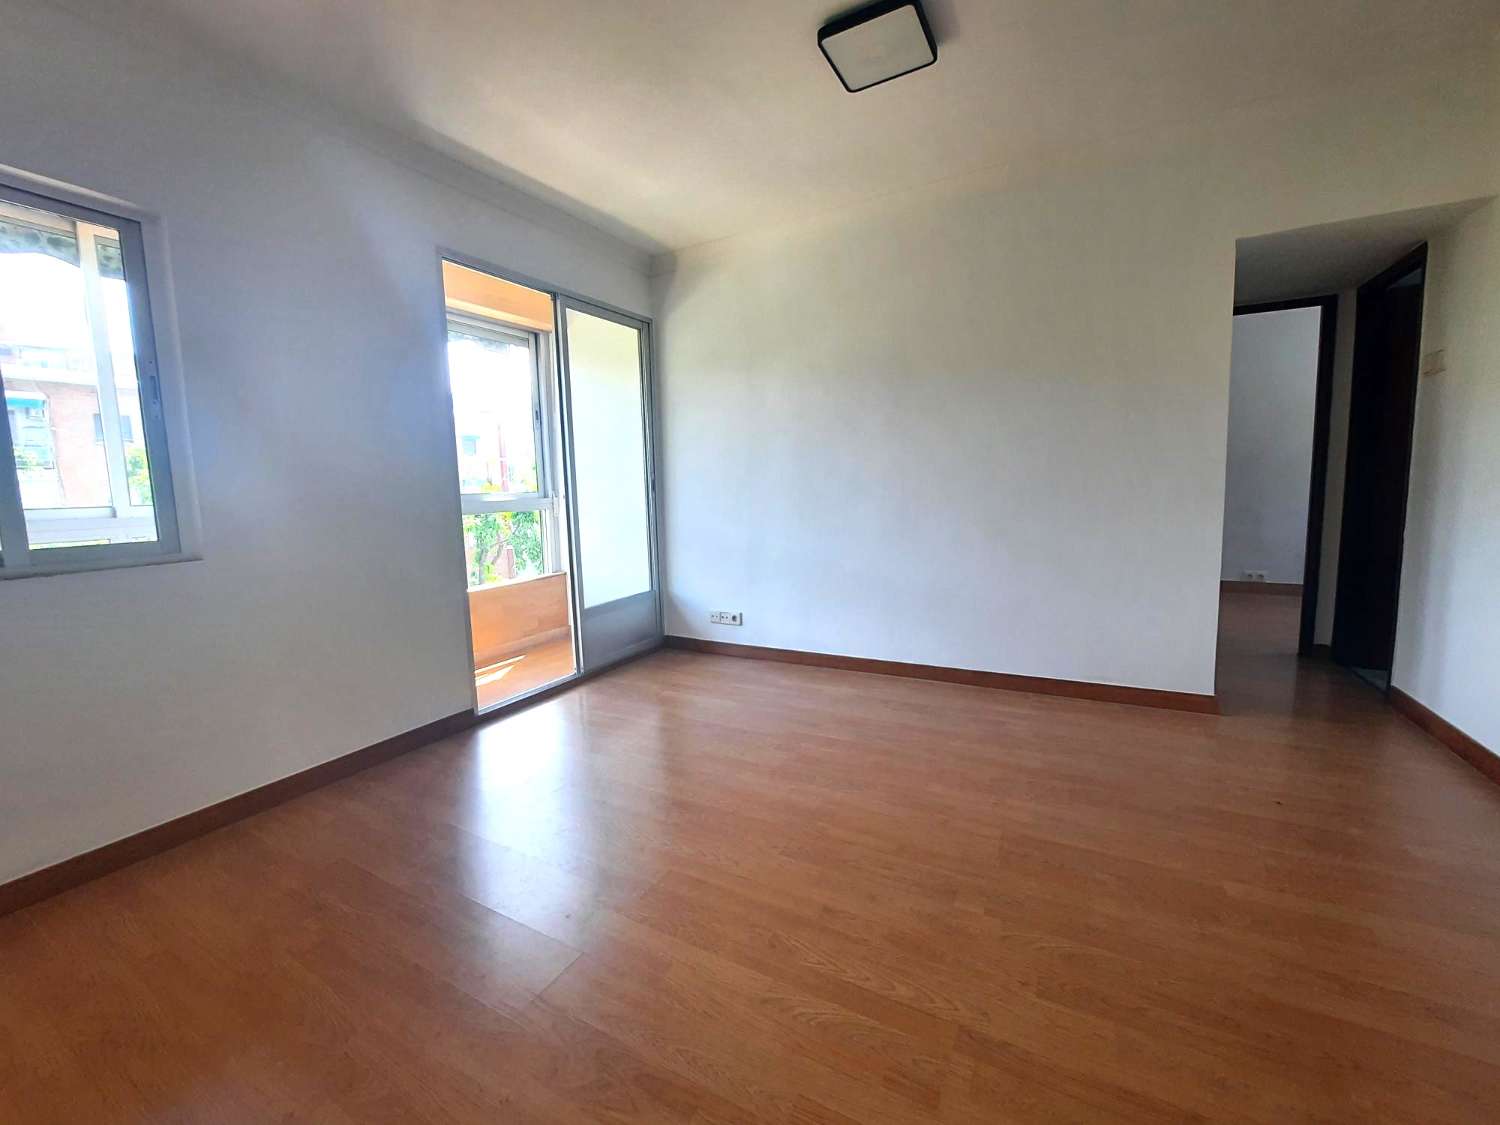 Flat for rent in Marroquina (Madrid)